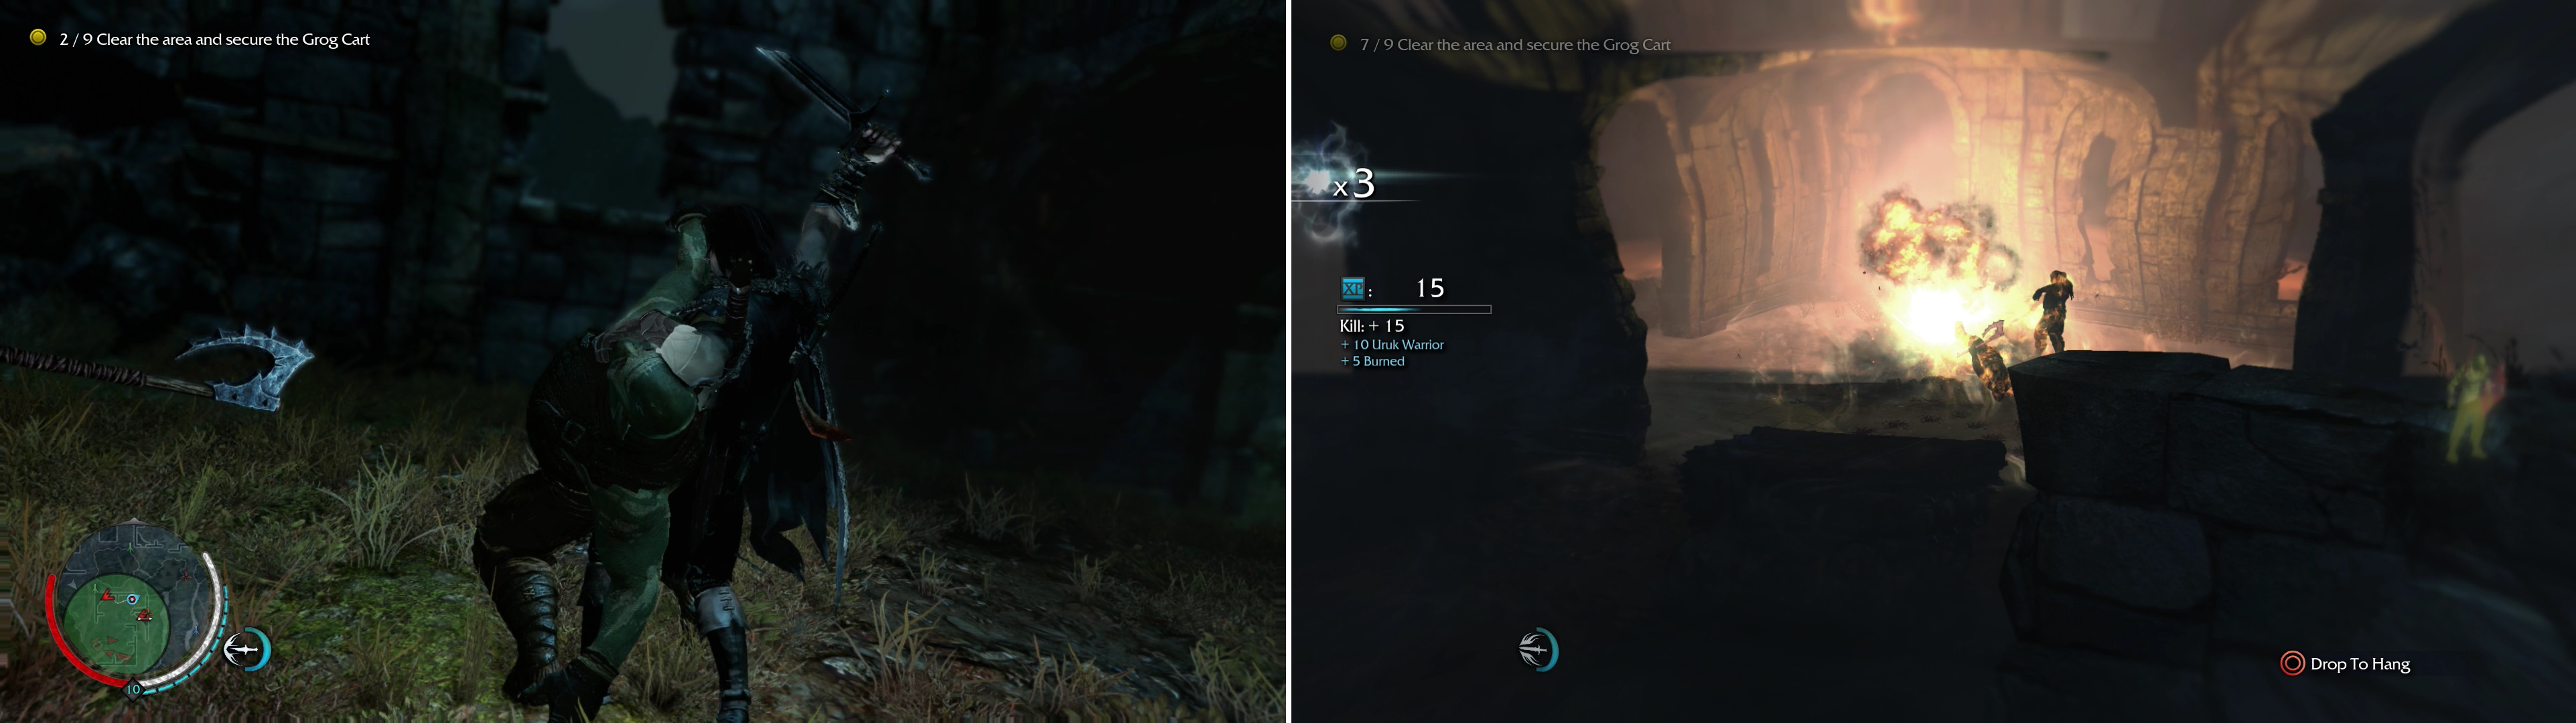 When clearing out the camps, you’ll have the option of killing Uruks however you fancy-by using good old Stealth Kills (left) or… well, somewhat more explosively (right).